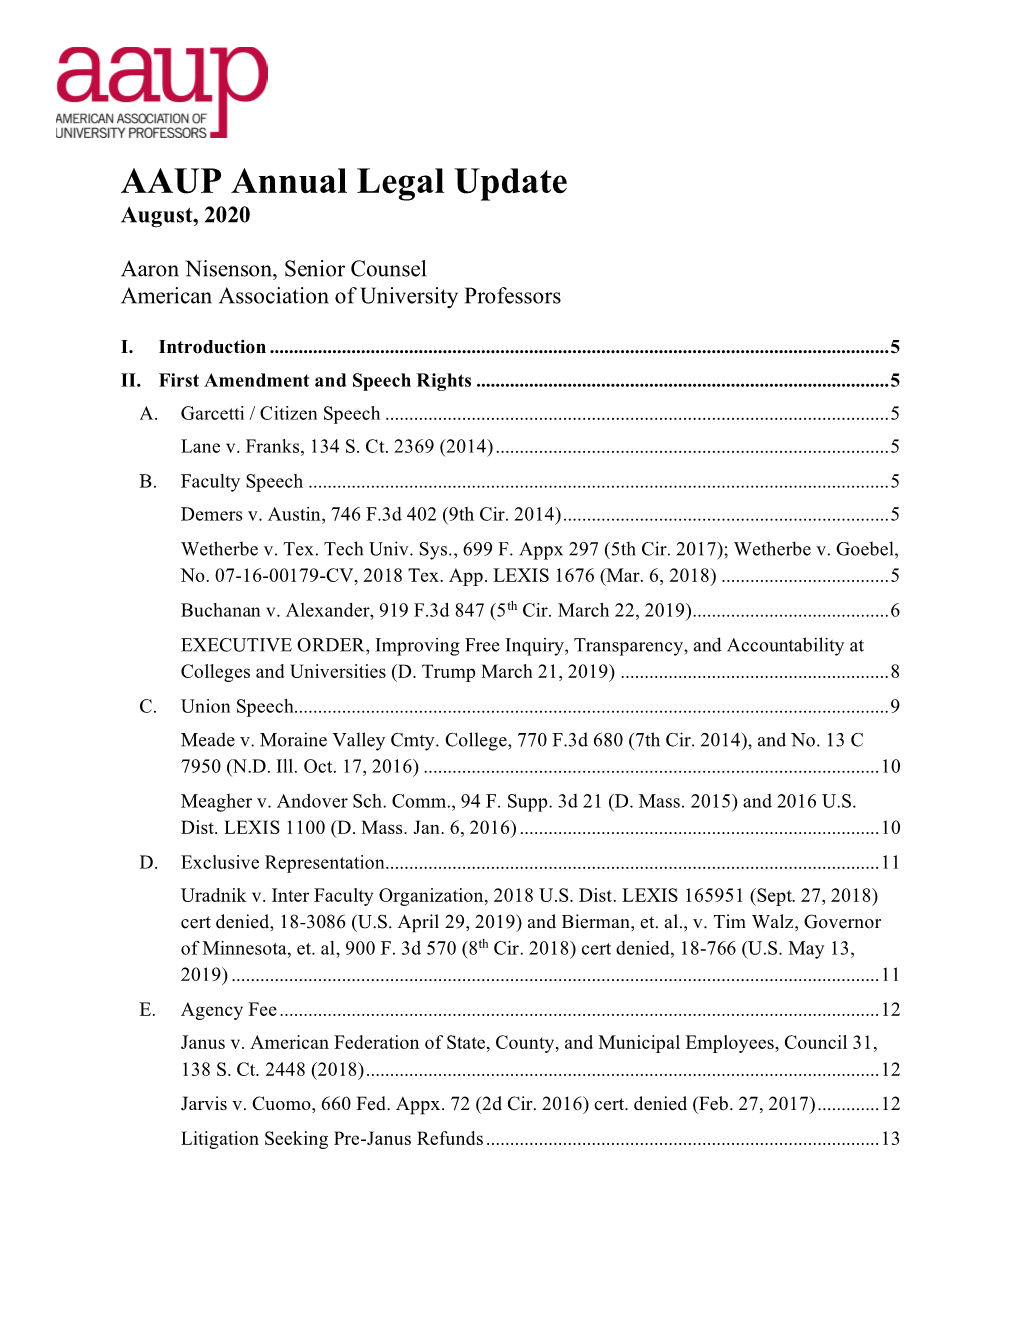 AAUP Annual Legal Update August, 2020